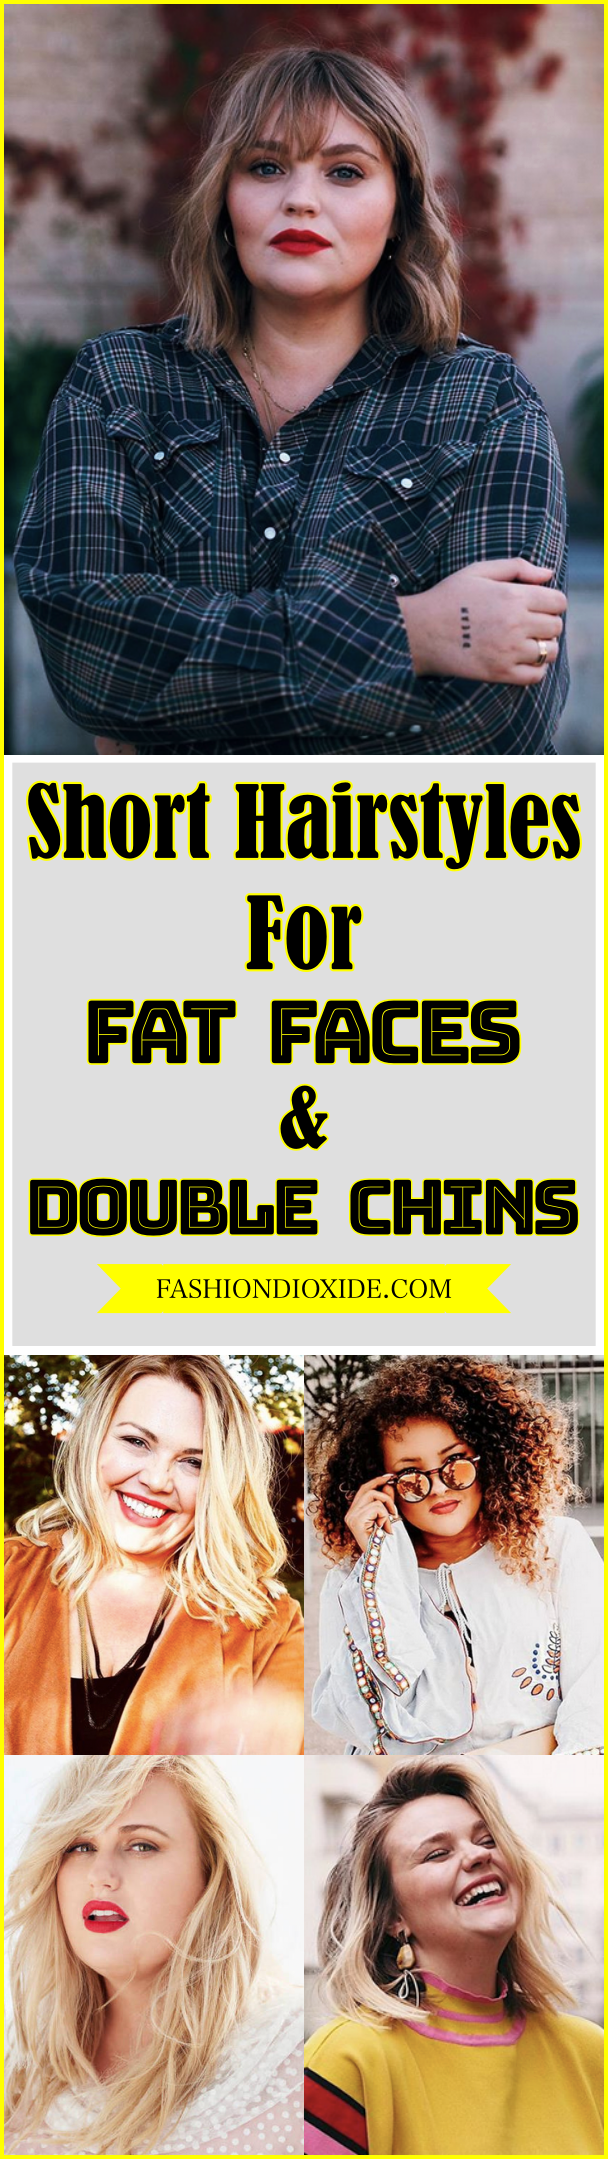 100 Short Hairstyles For Fat Faces Double Chins